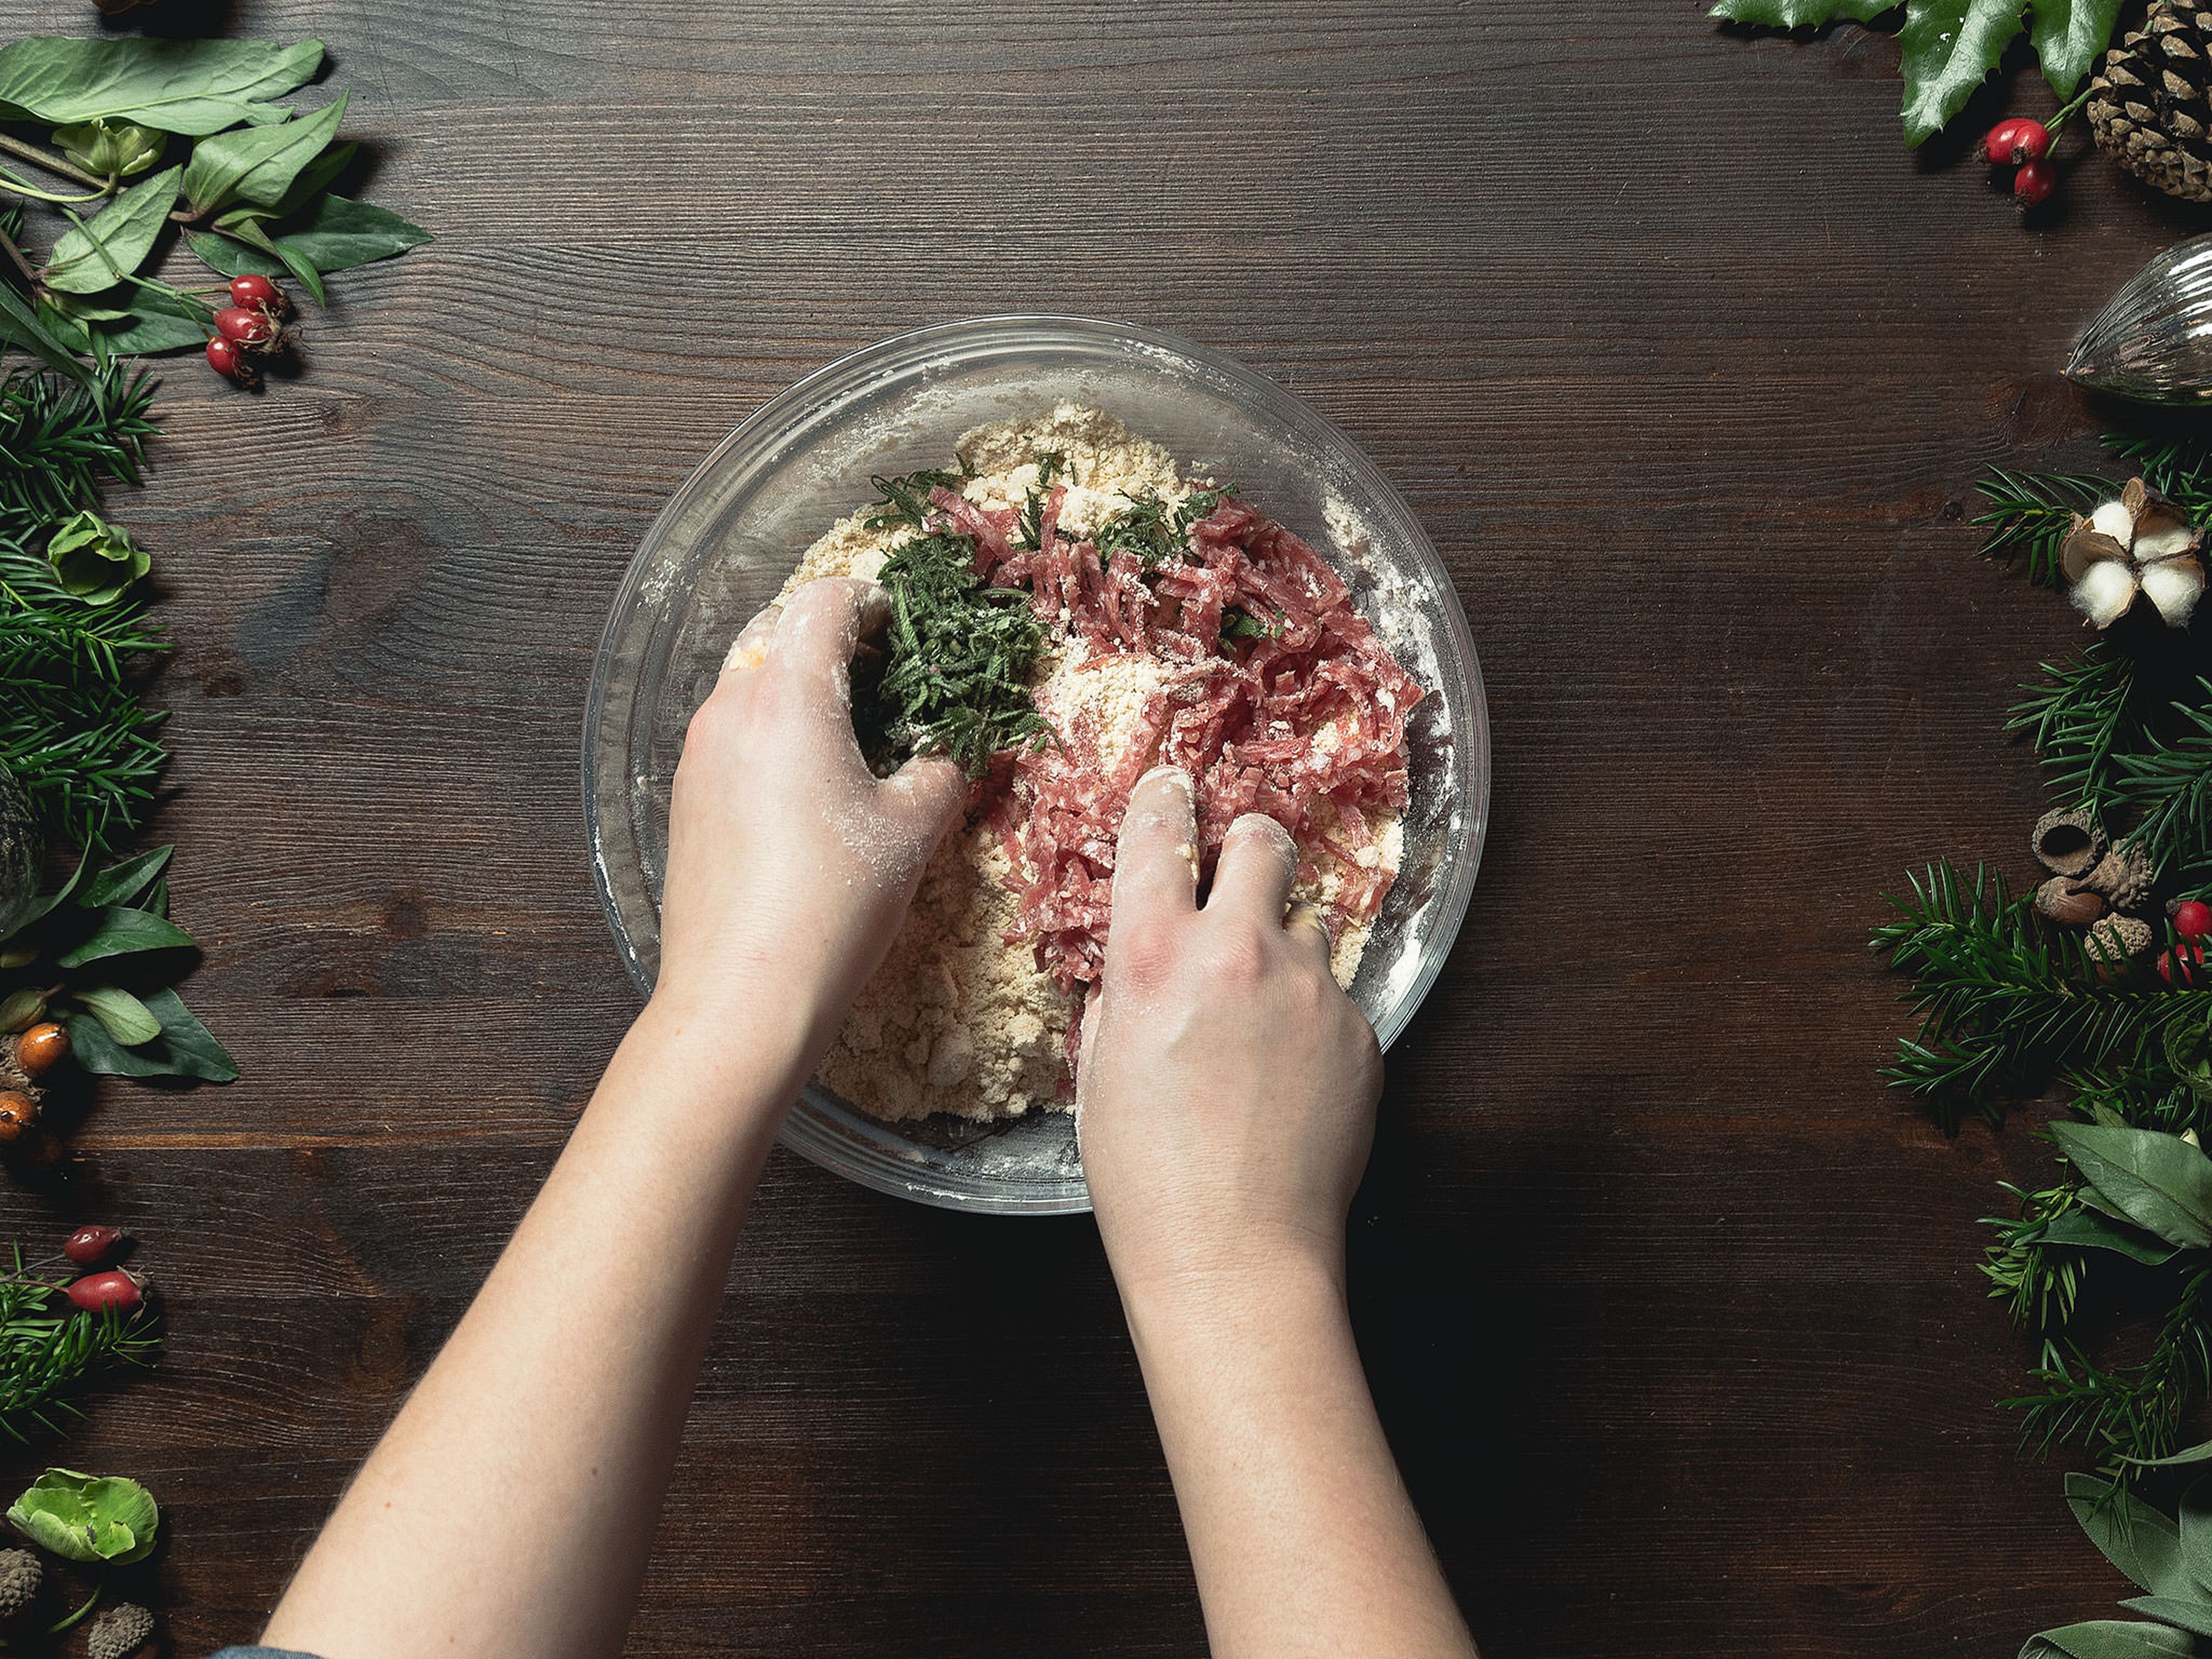 Mix flour, salt, baking powder, and smoked paprika powder in a mixing bowl. Mix butter into the flour mixture with your hands to form a crumbly dough. Add chopped salami and sage. Add buttermilk and knead everything together briefly.